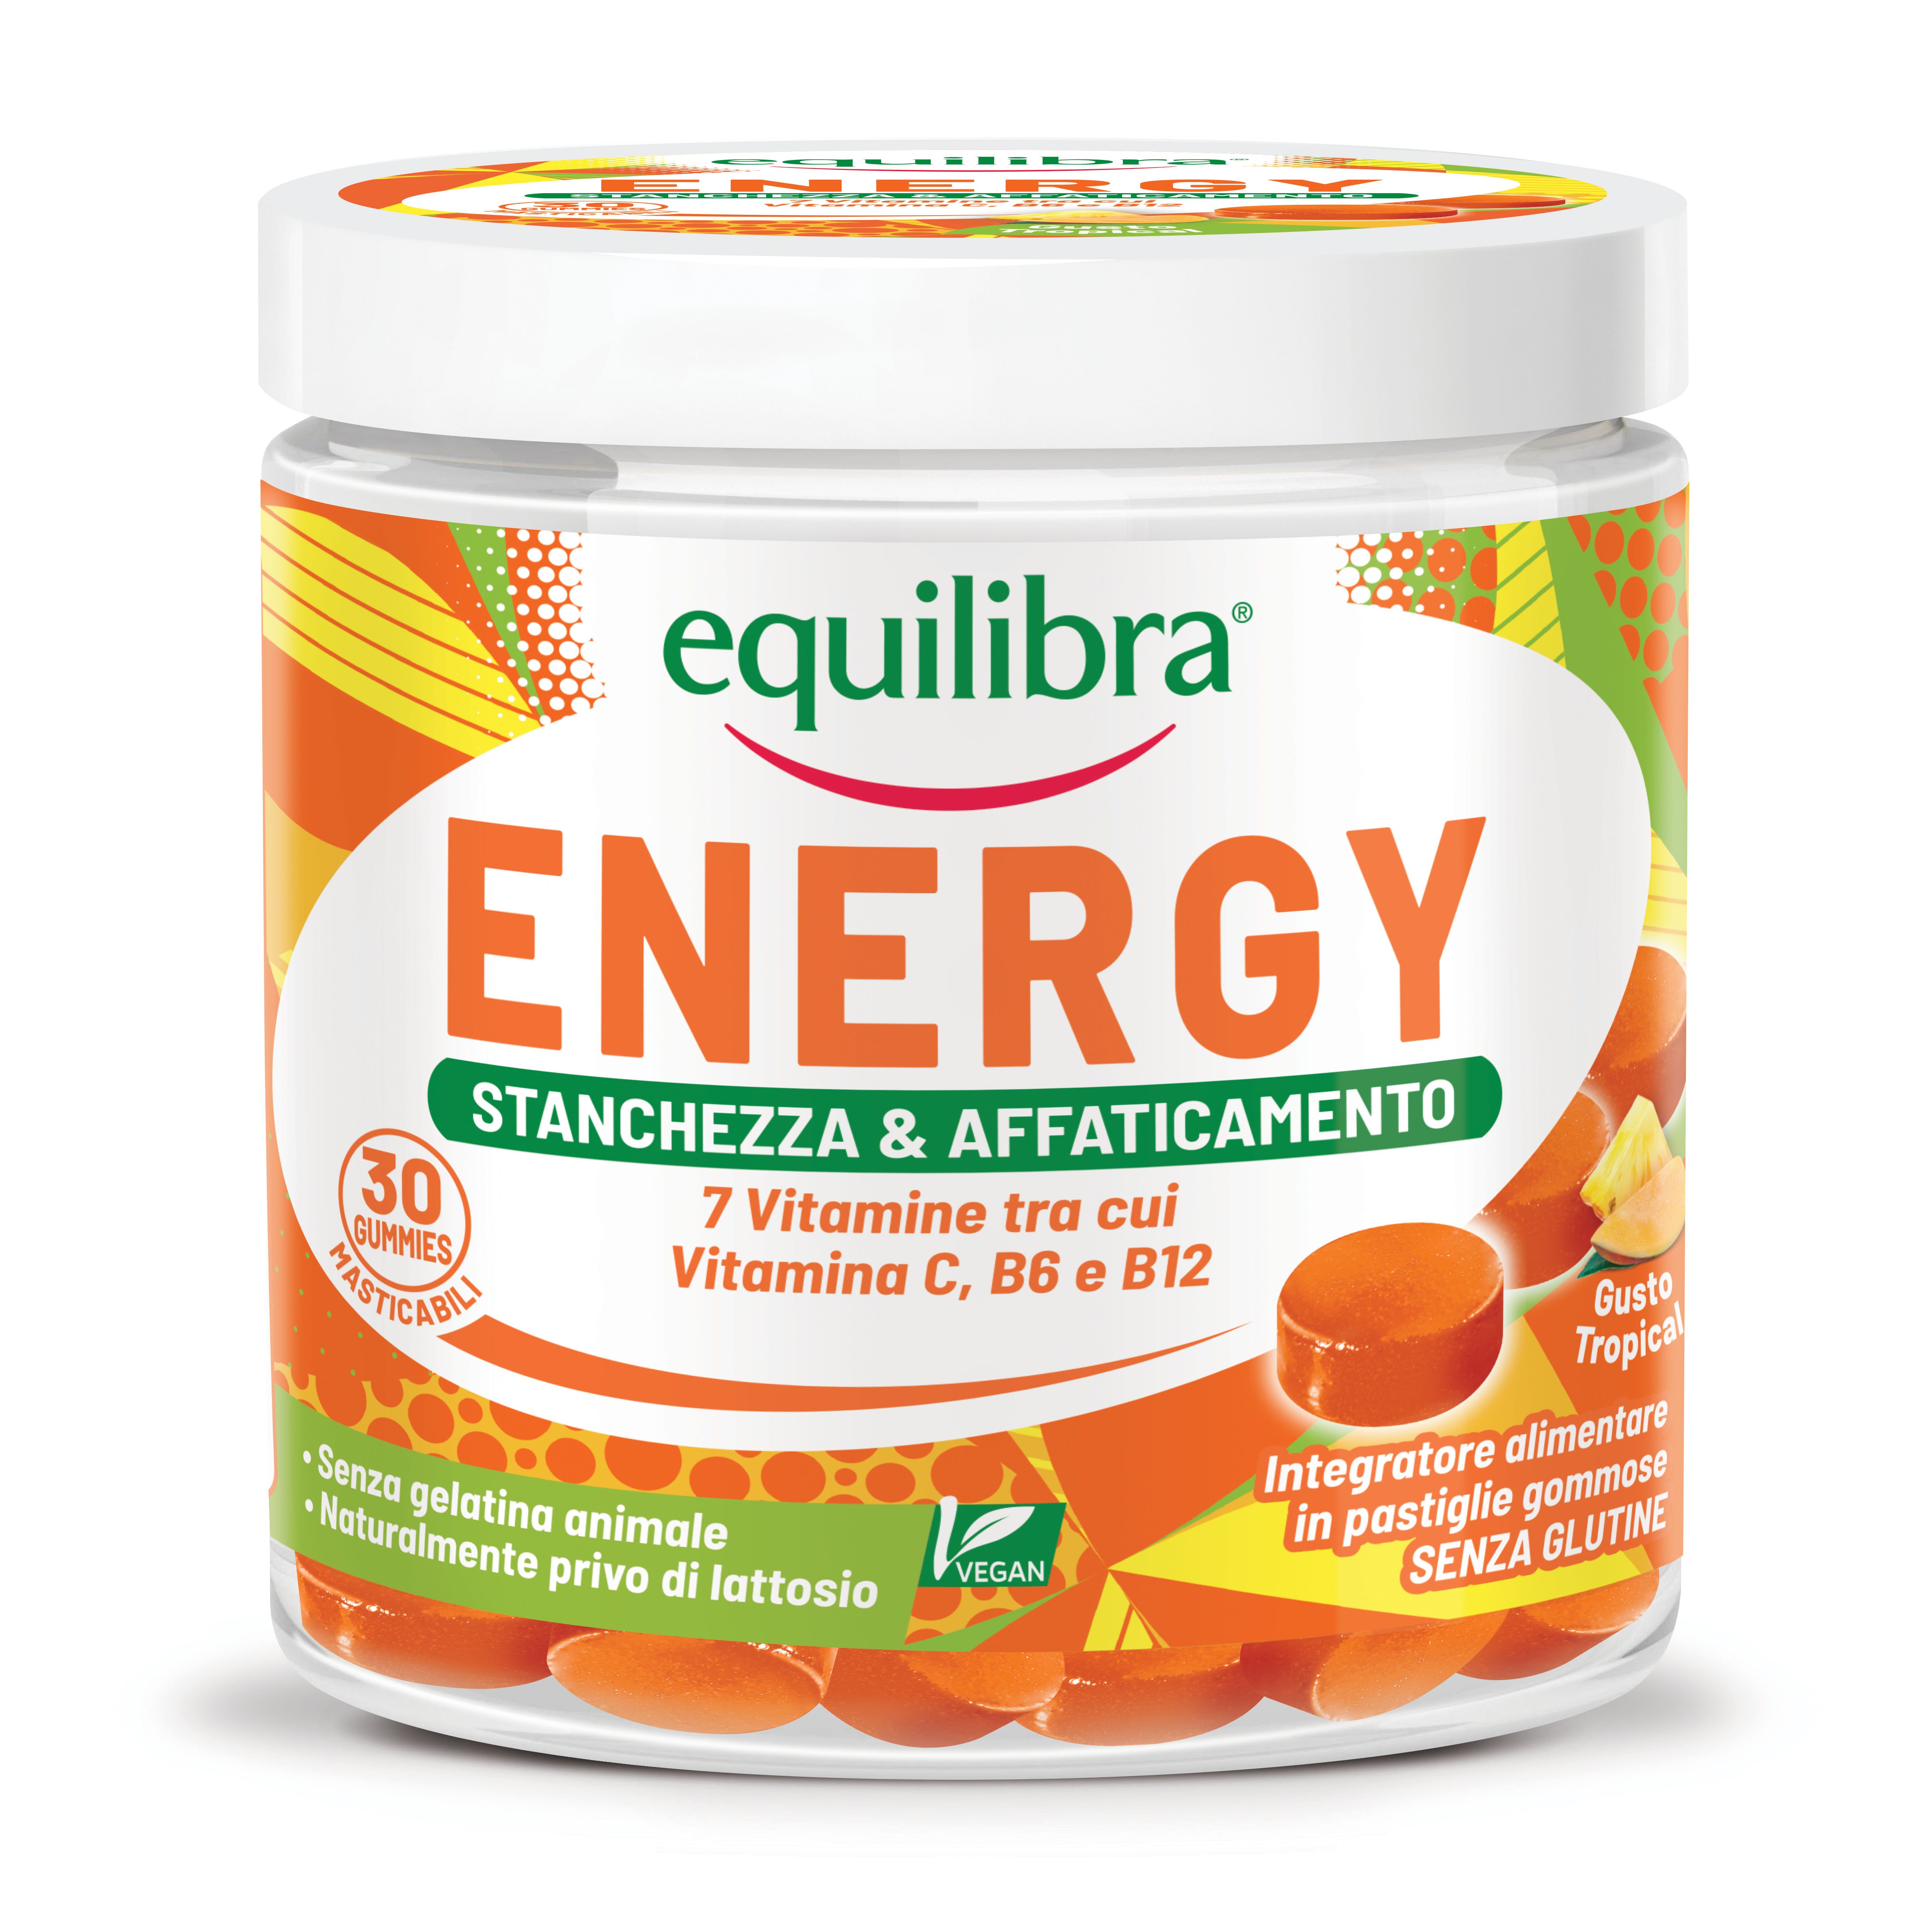 Image of Energy Equilibra 30 Gommose